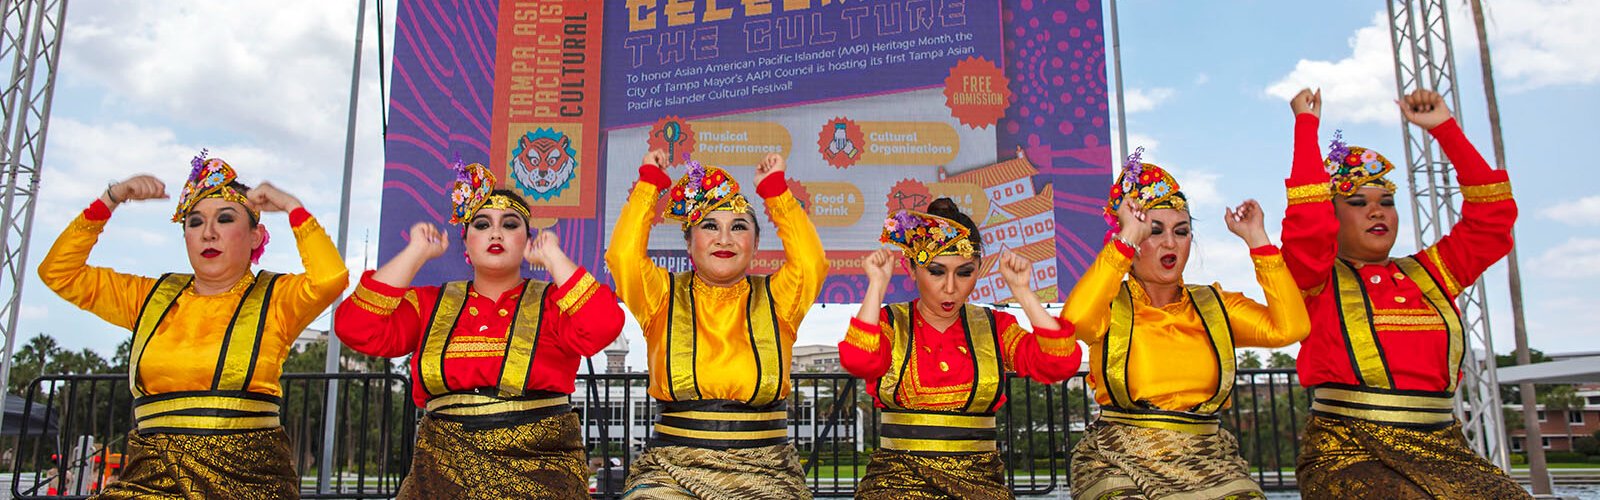 The Asian Pacific Islander Cultural Festival celebrates the food and culture of Asia and the Pacific Islands.